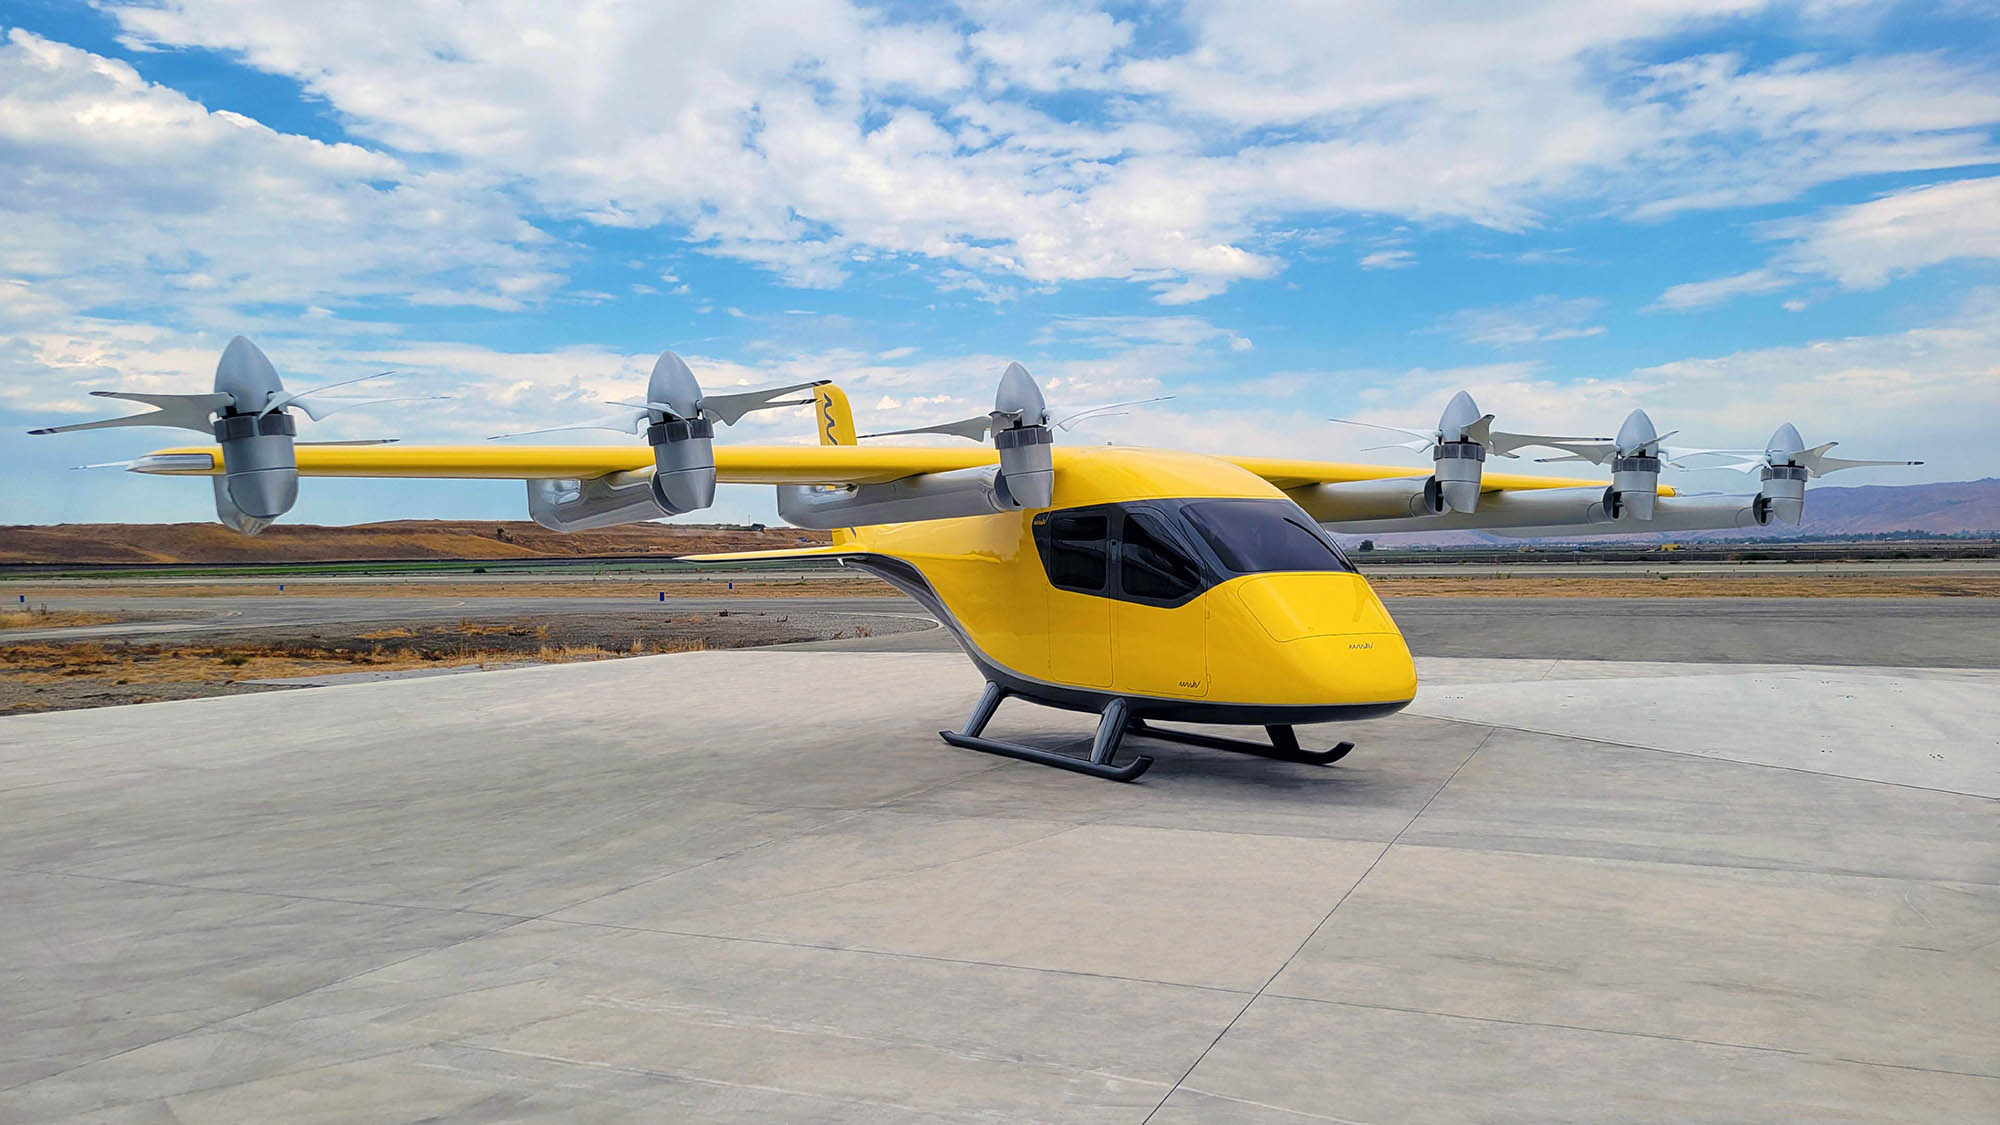 Wisk Aero's latest flying taxi has four seats and can fly itself